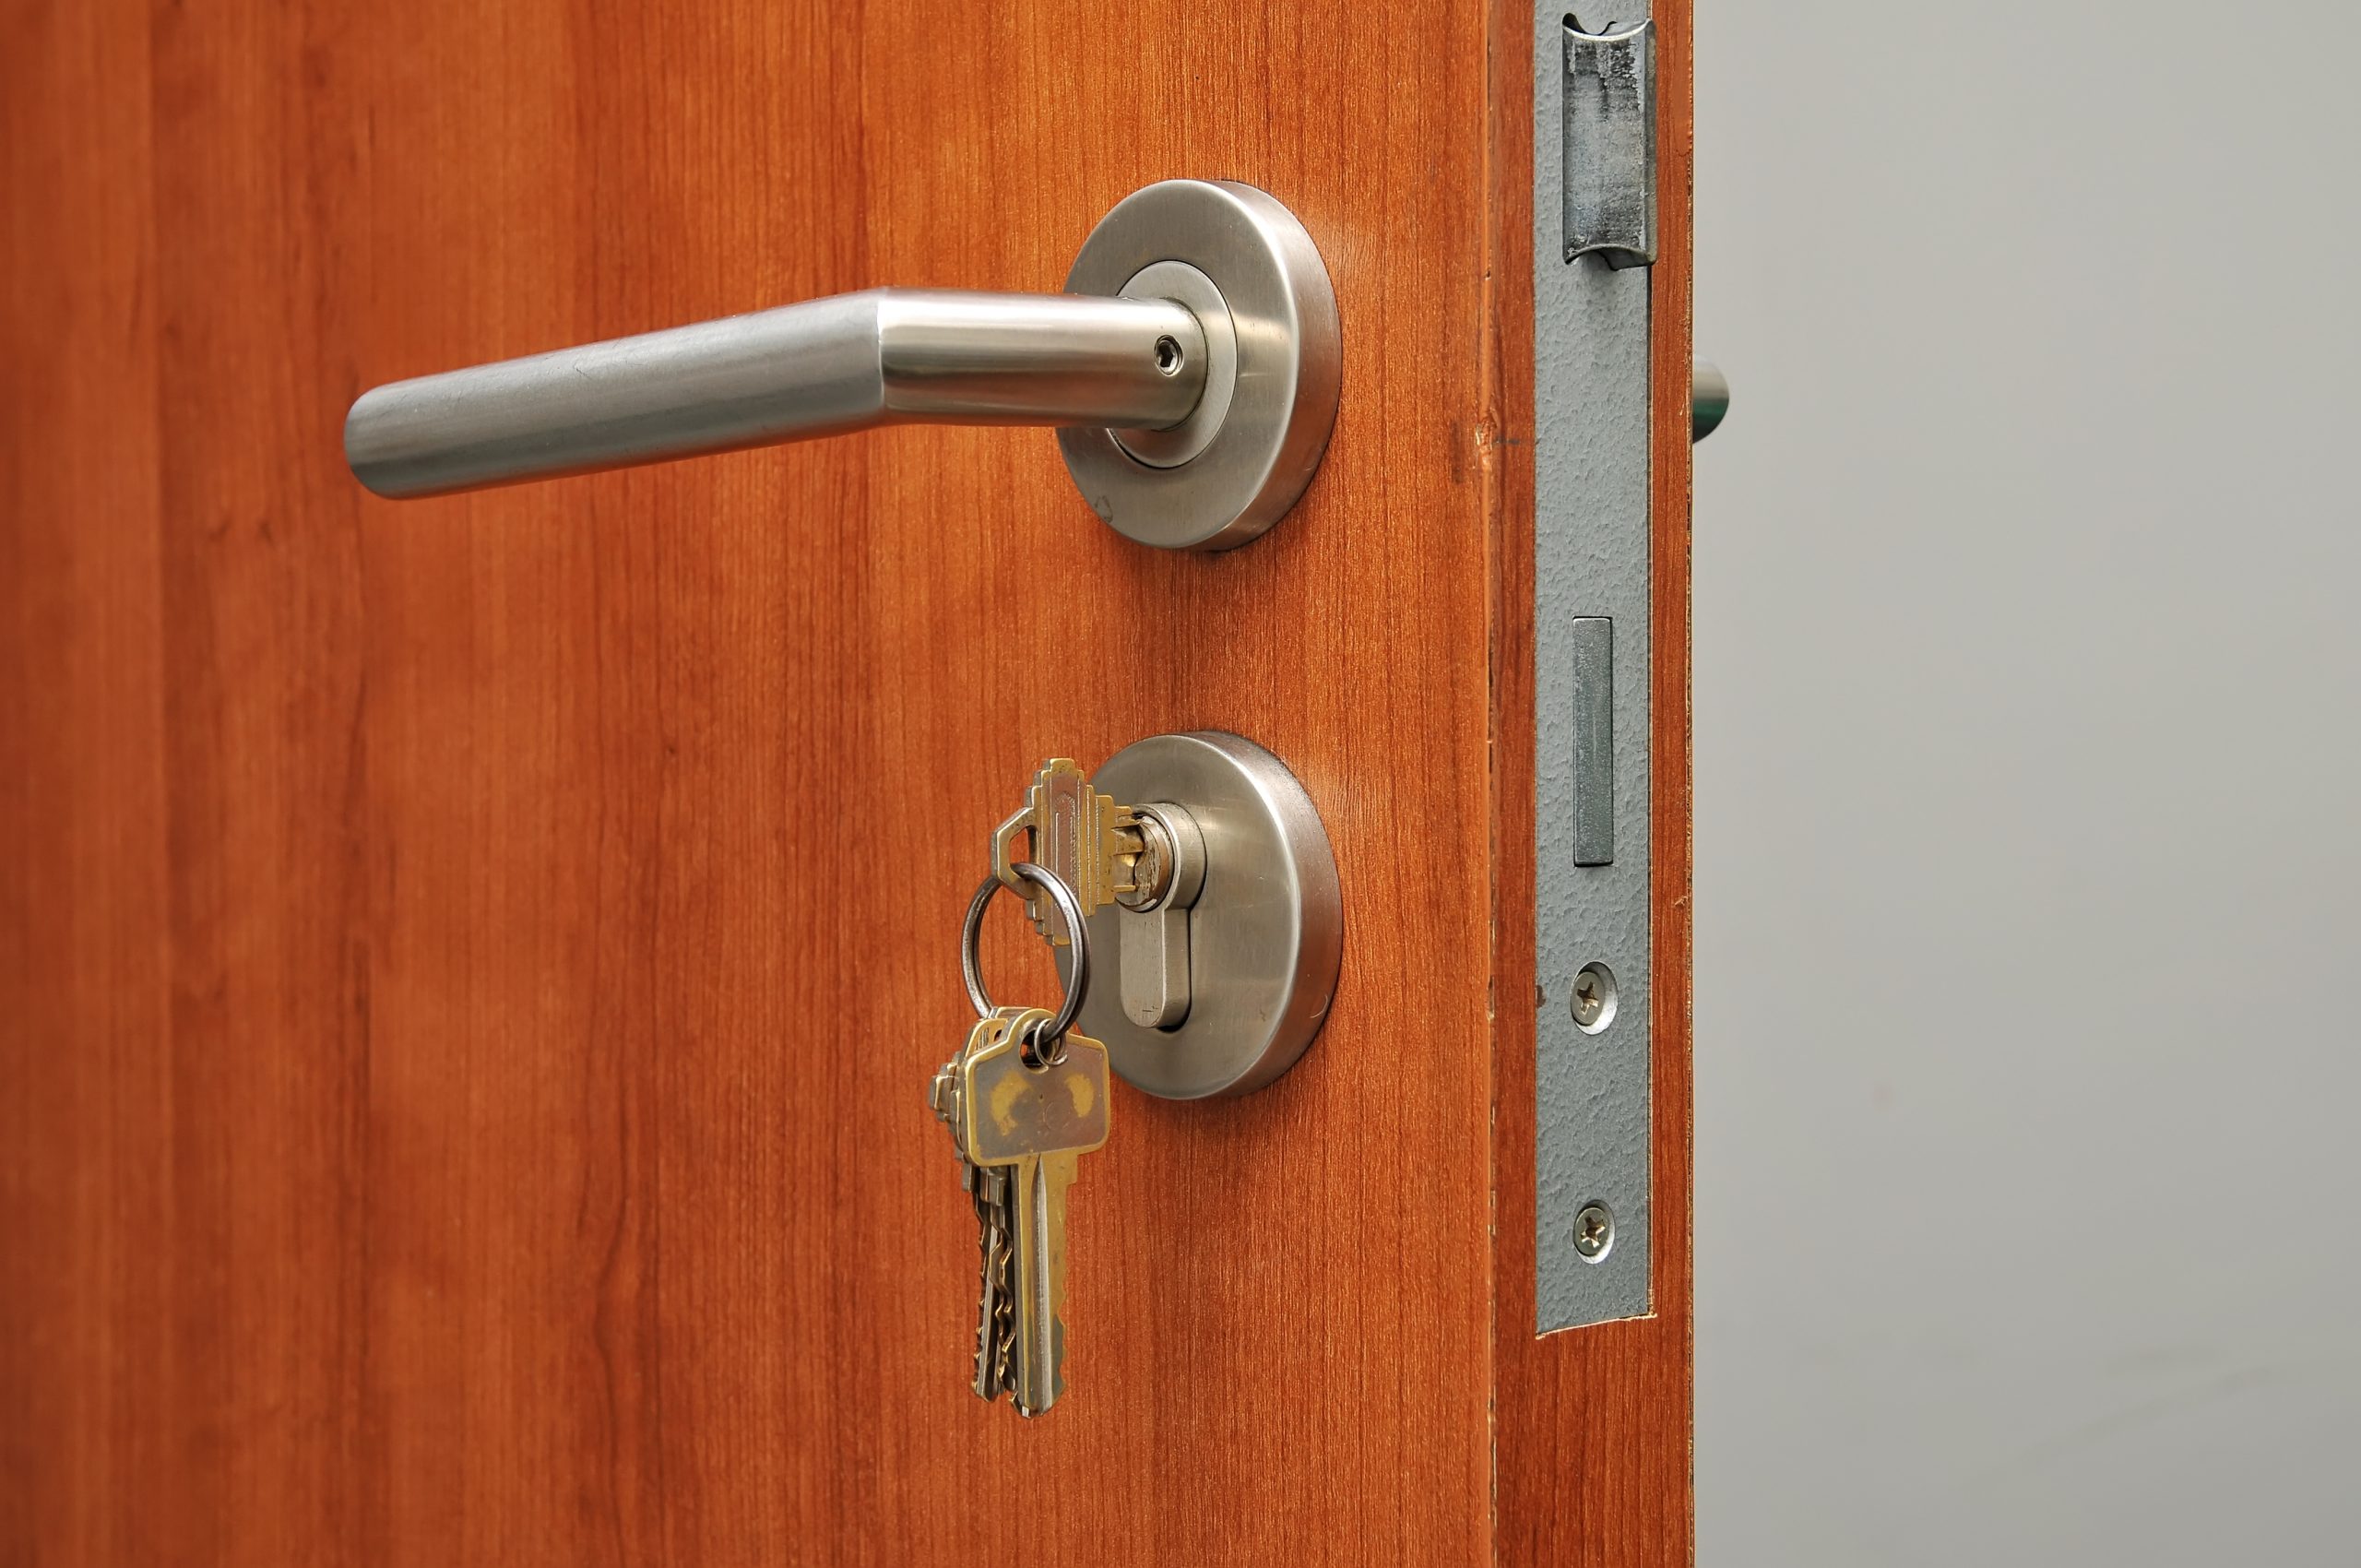 Rekeying Locks vs Replacing Locks? Which option do you go for?